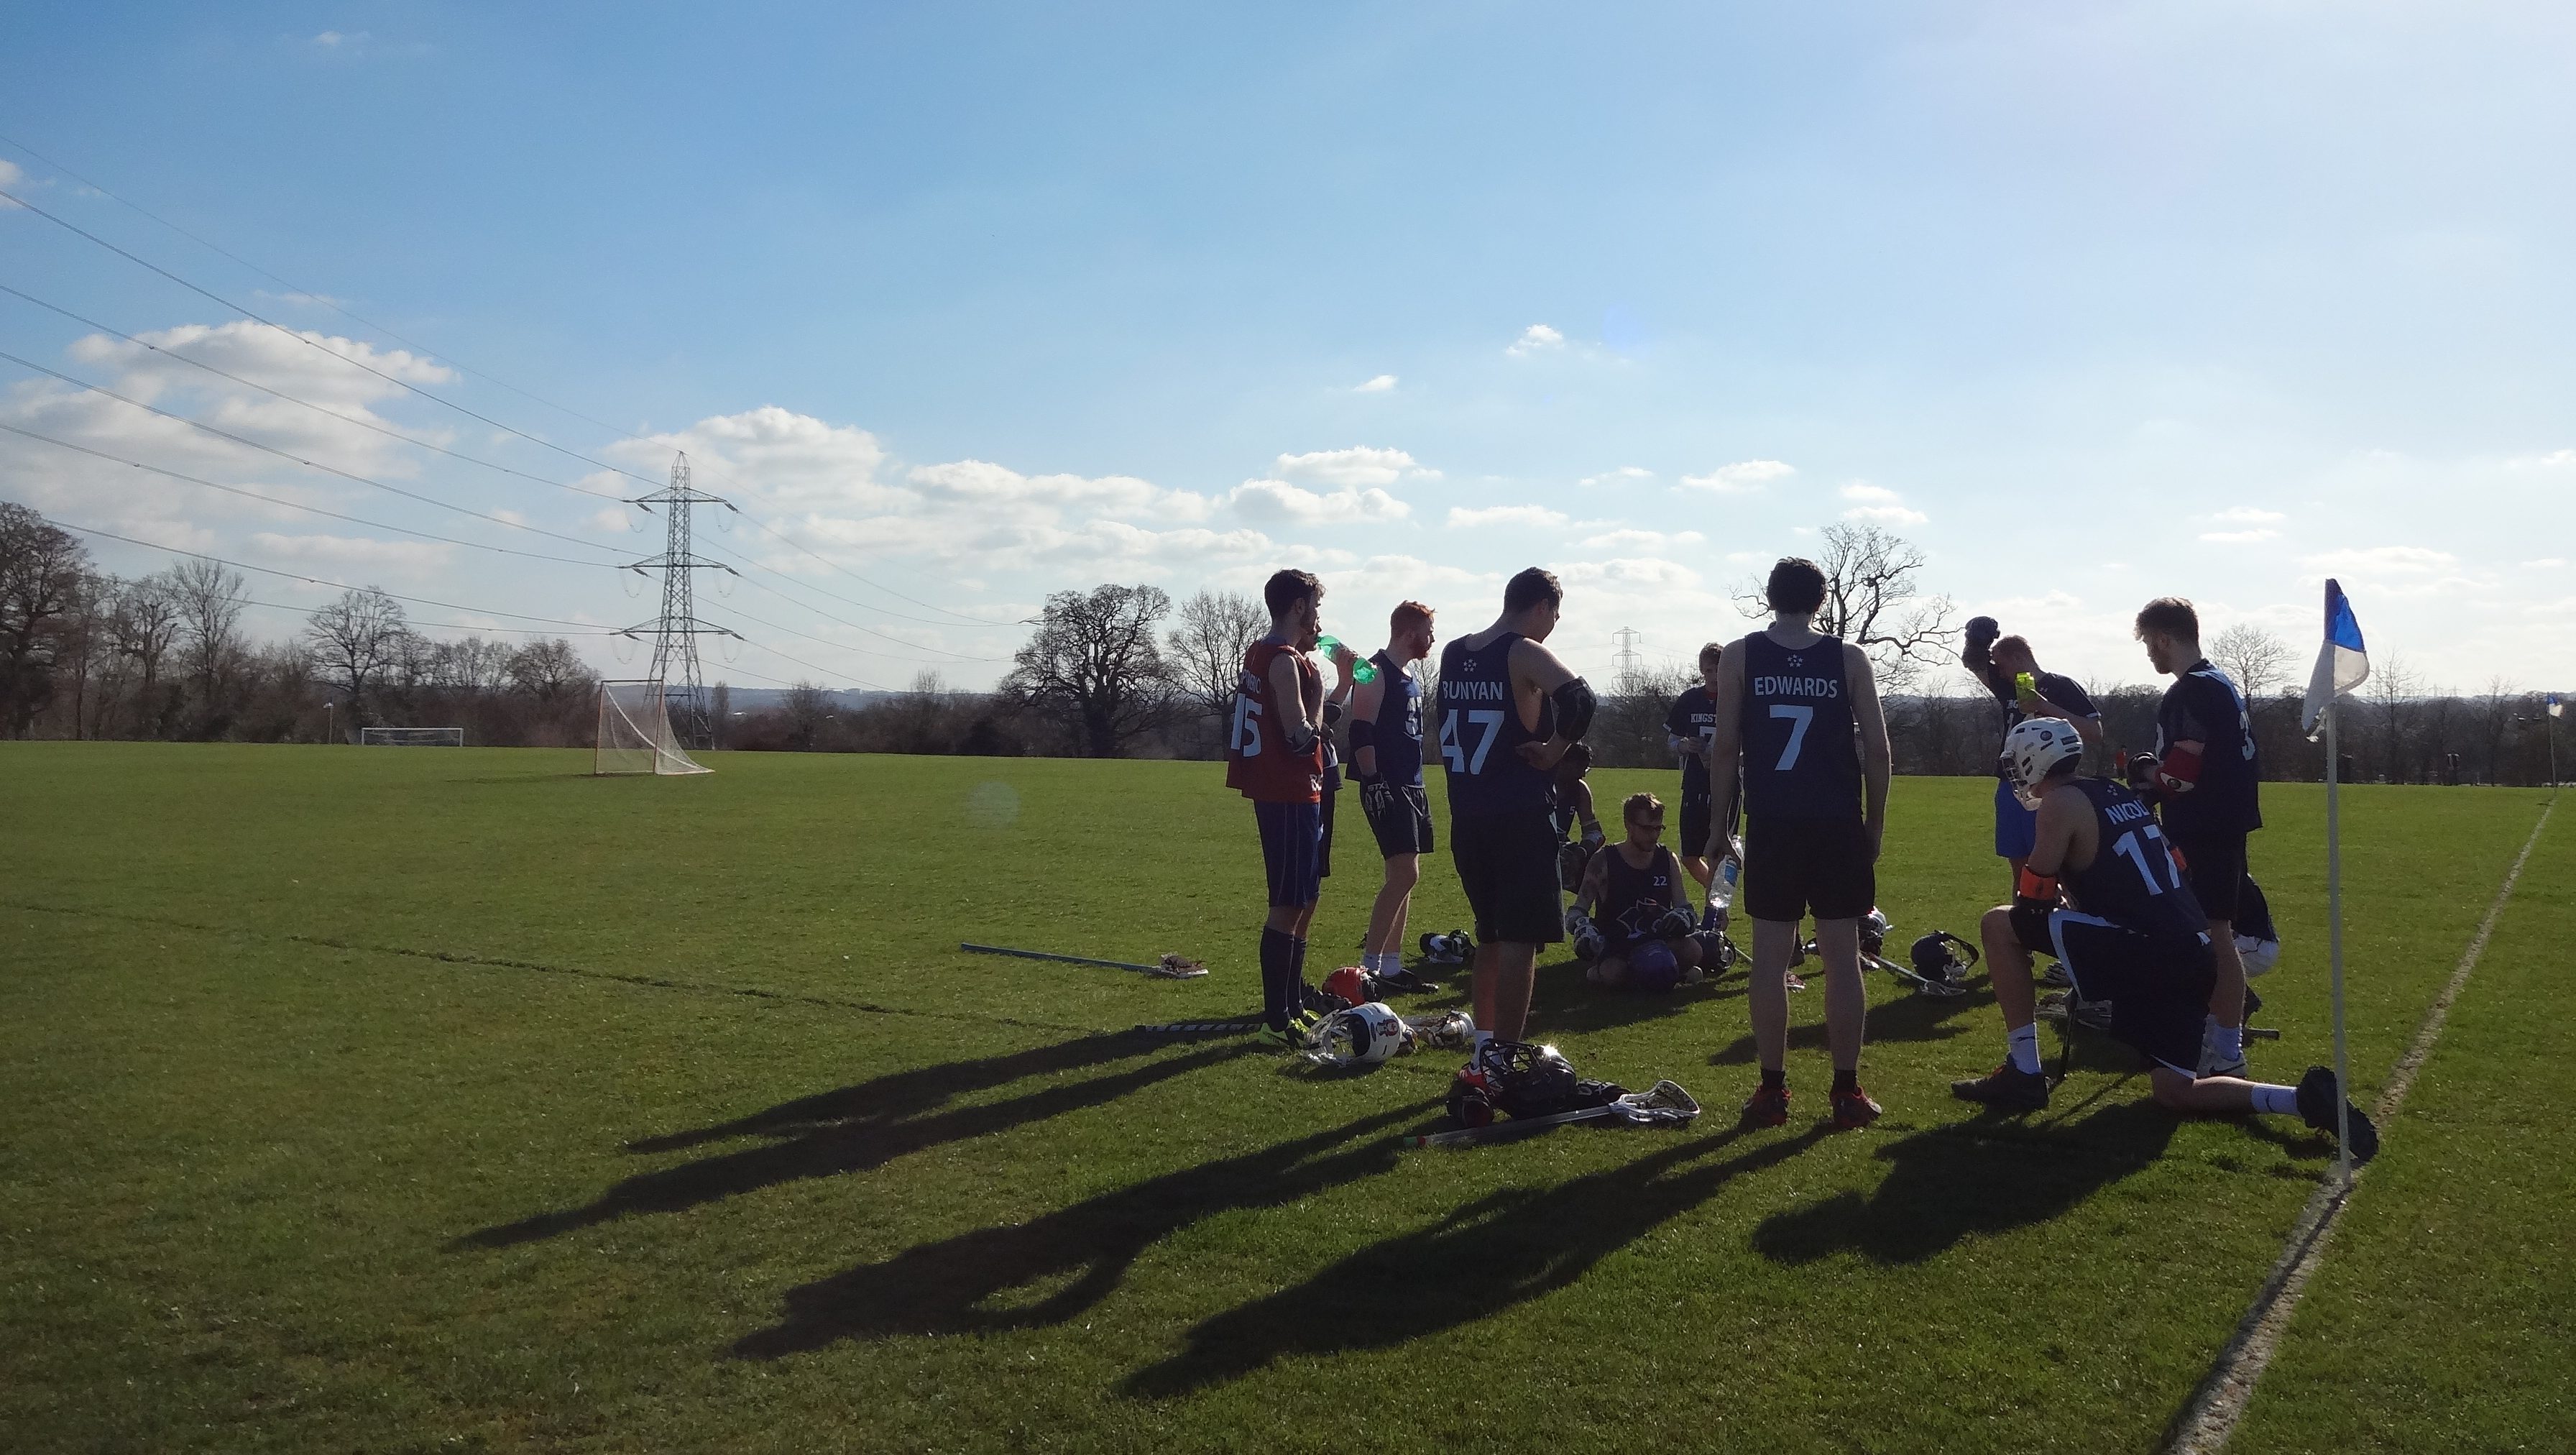 WATCH: Kingston men’s lacrosse crushed by Portsmouth in last game of the season